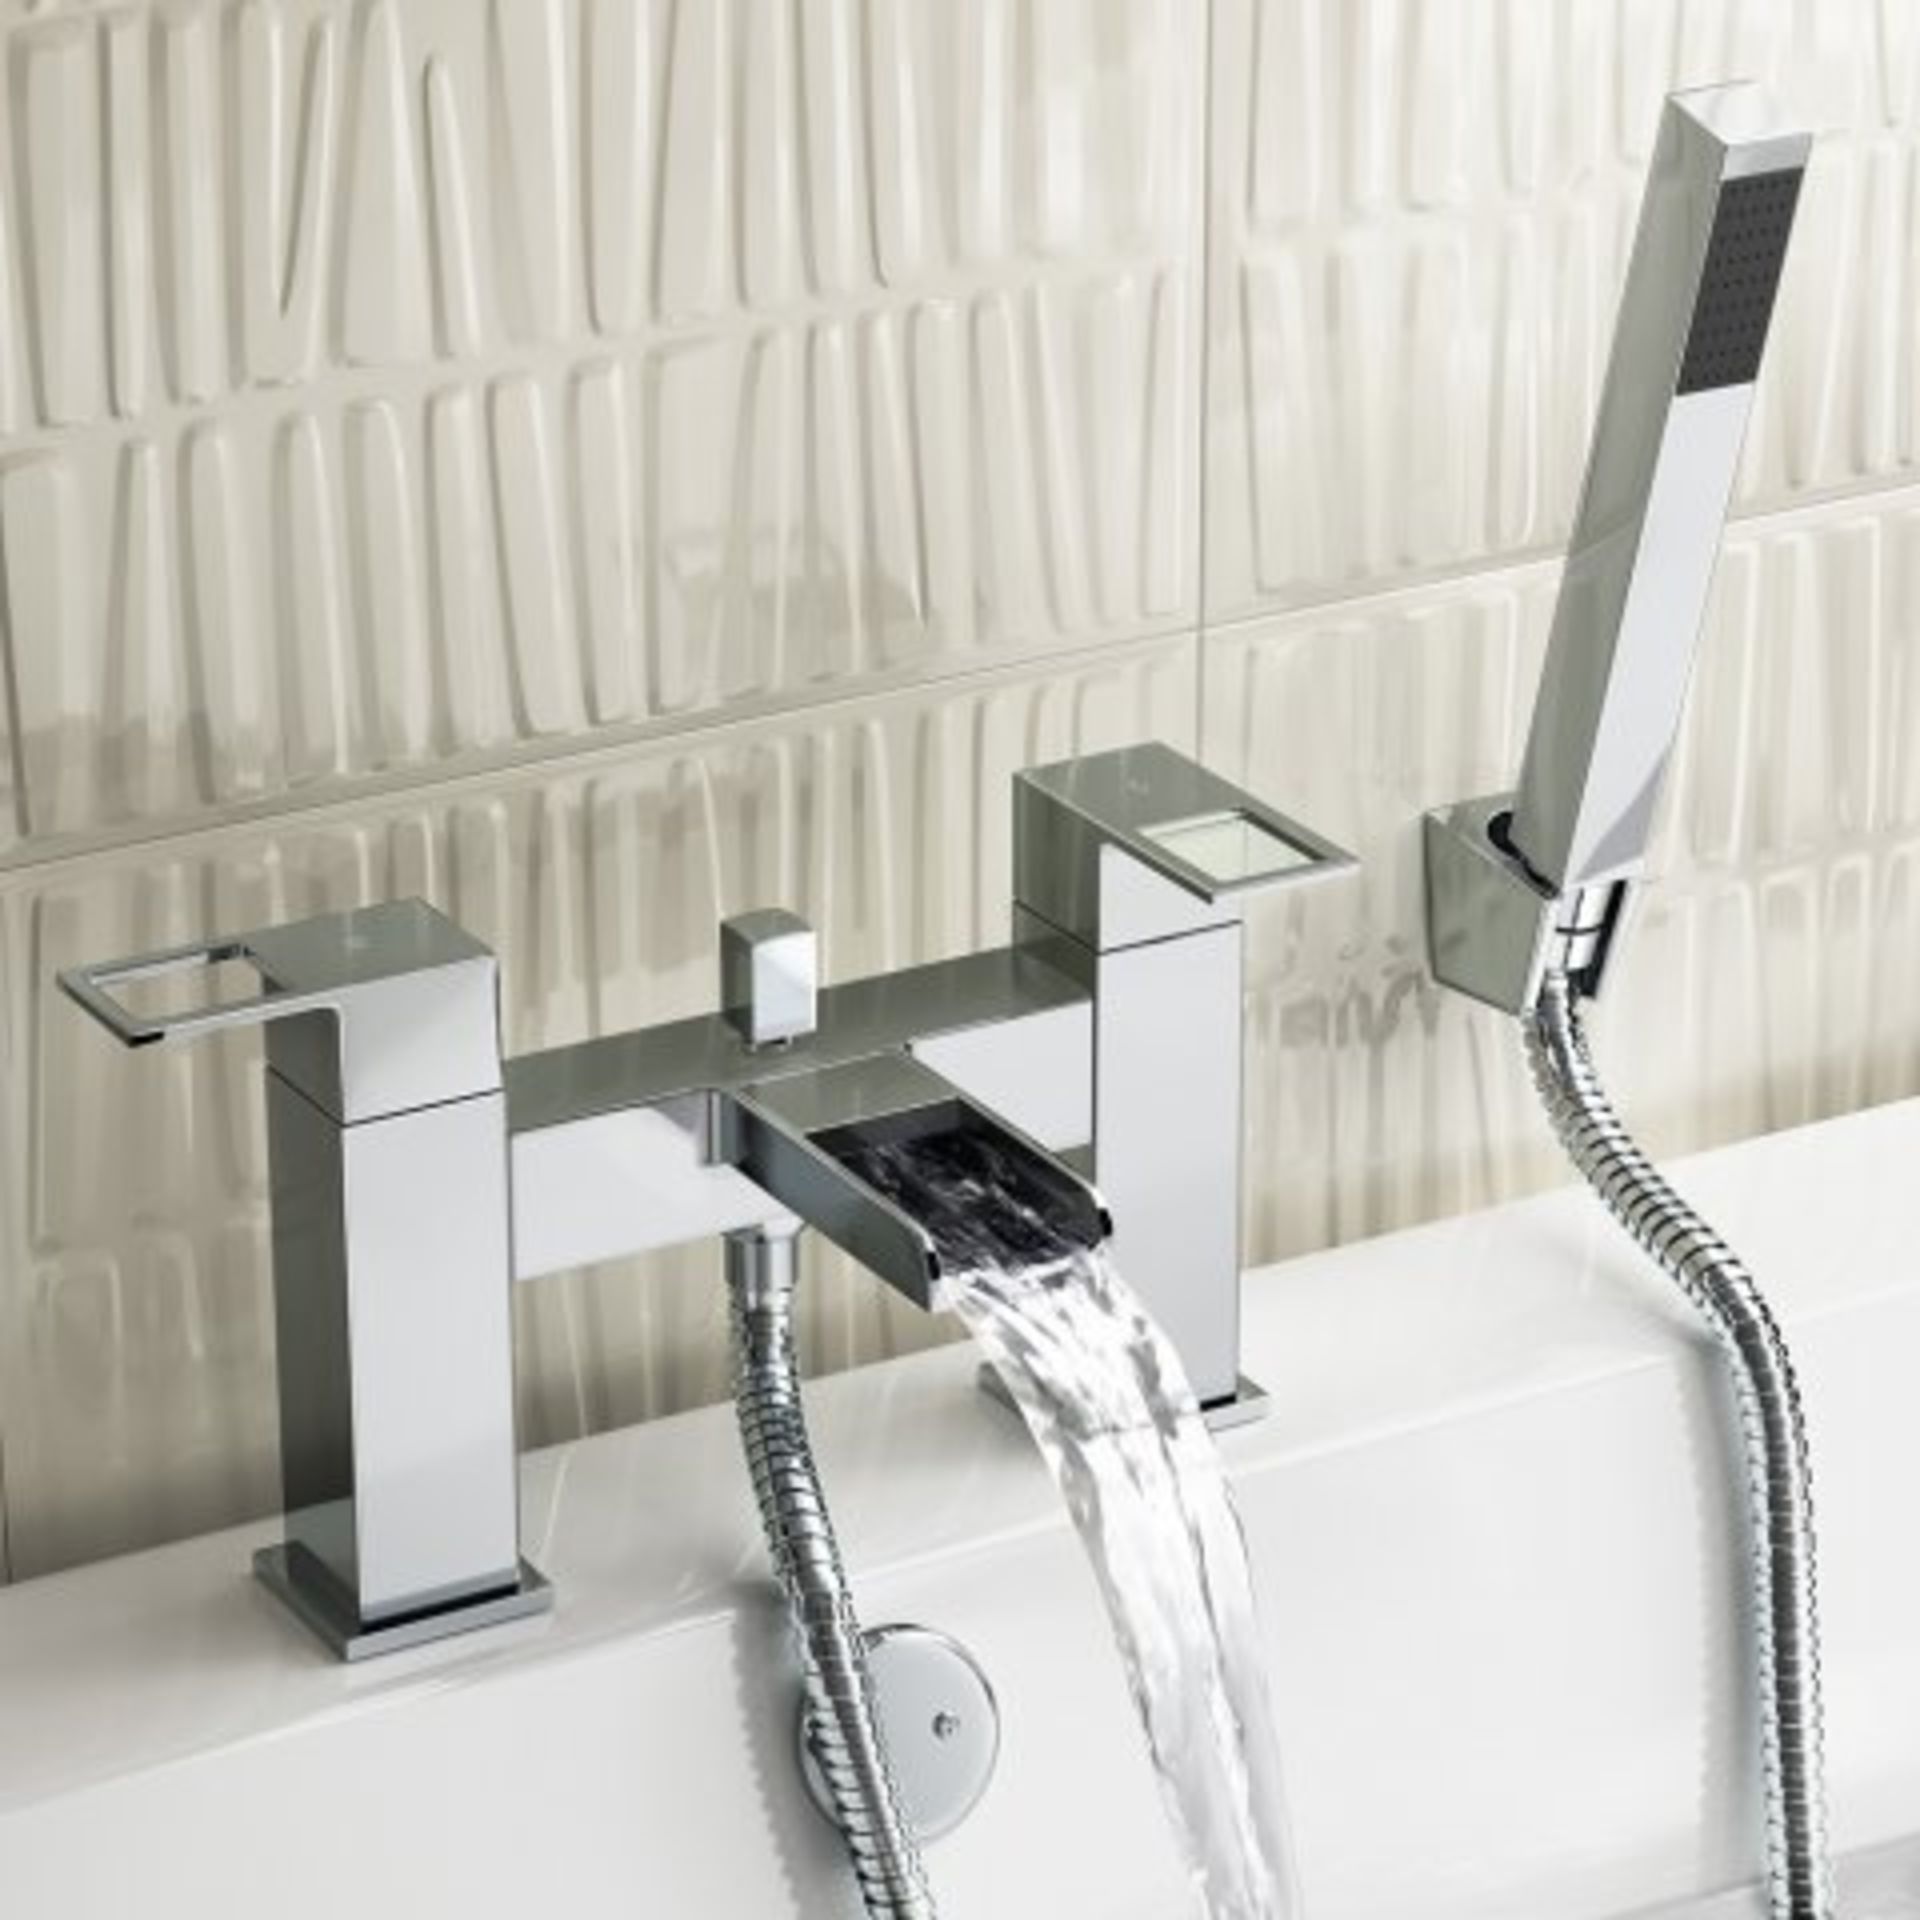 (K163) Everest II Waterfall Bath Mixer Tap with Hand Held Shower. RRP £199.99. Presenting a